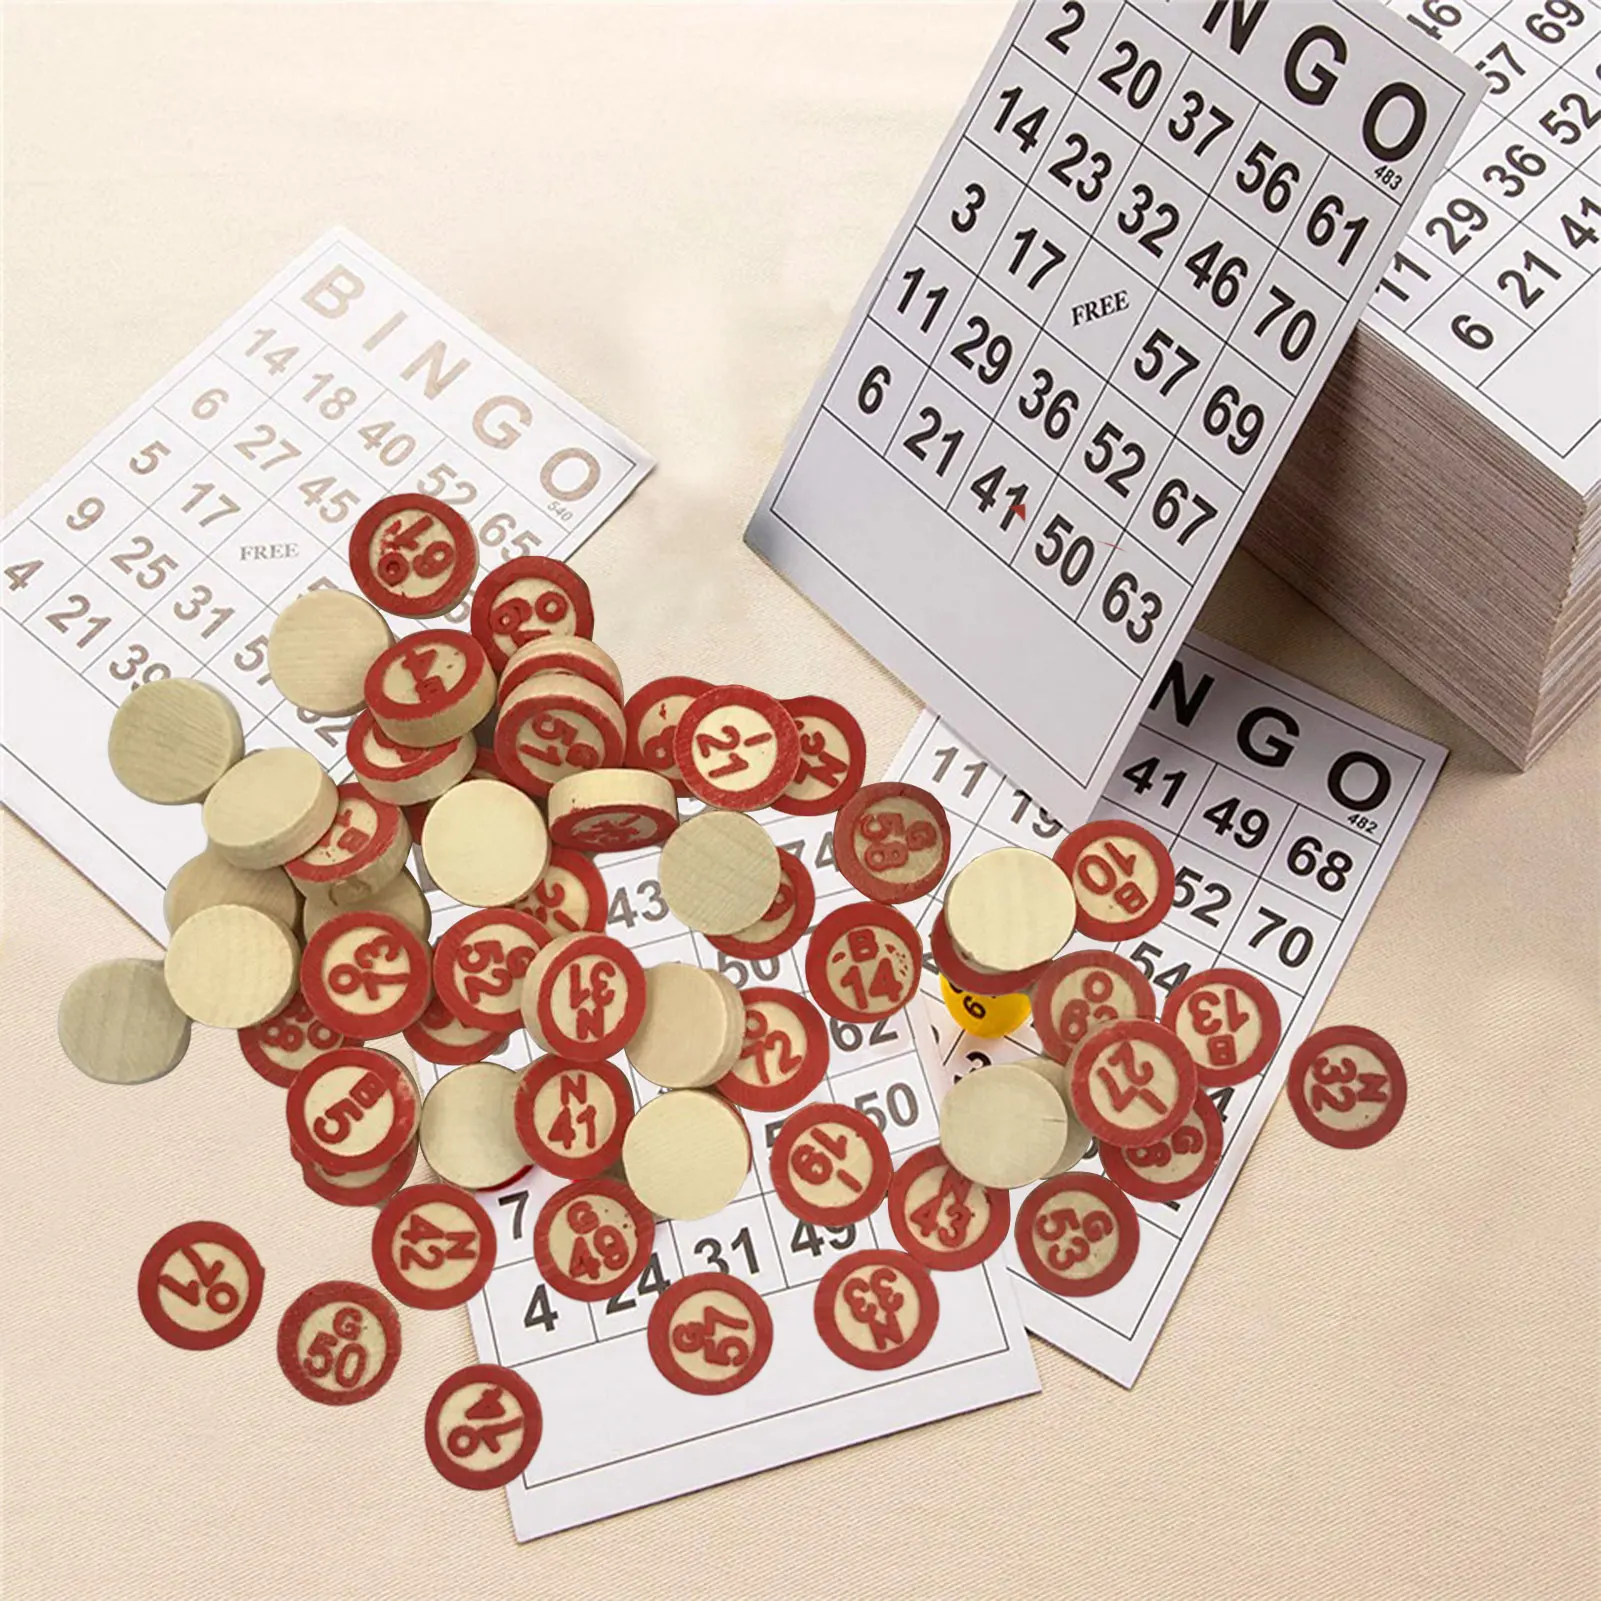 40x Bingo Cards 75 Numbers Chips Card Game for Kids Party Toy Board Game 